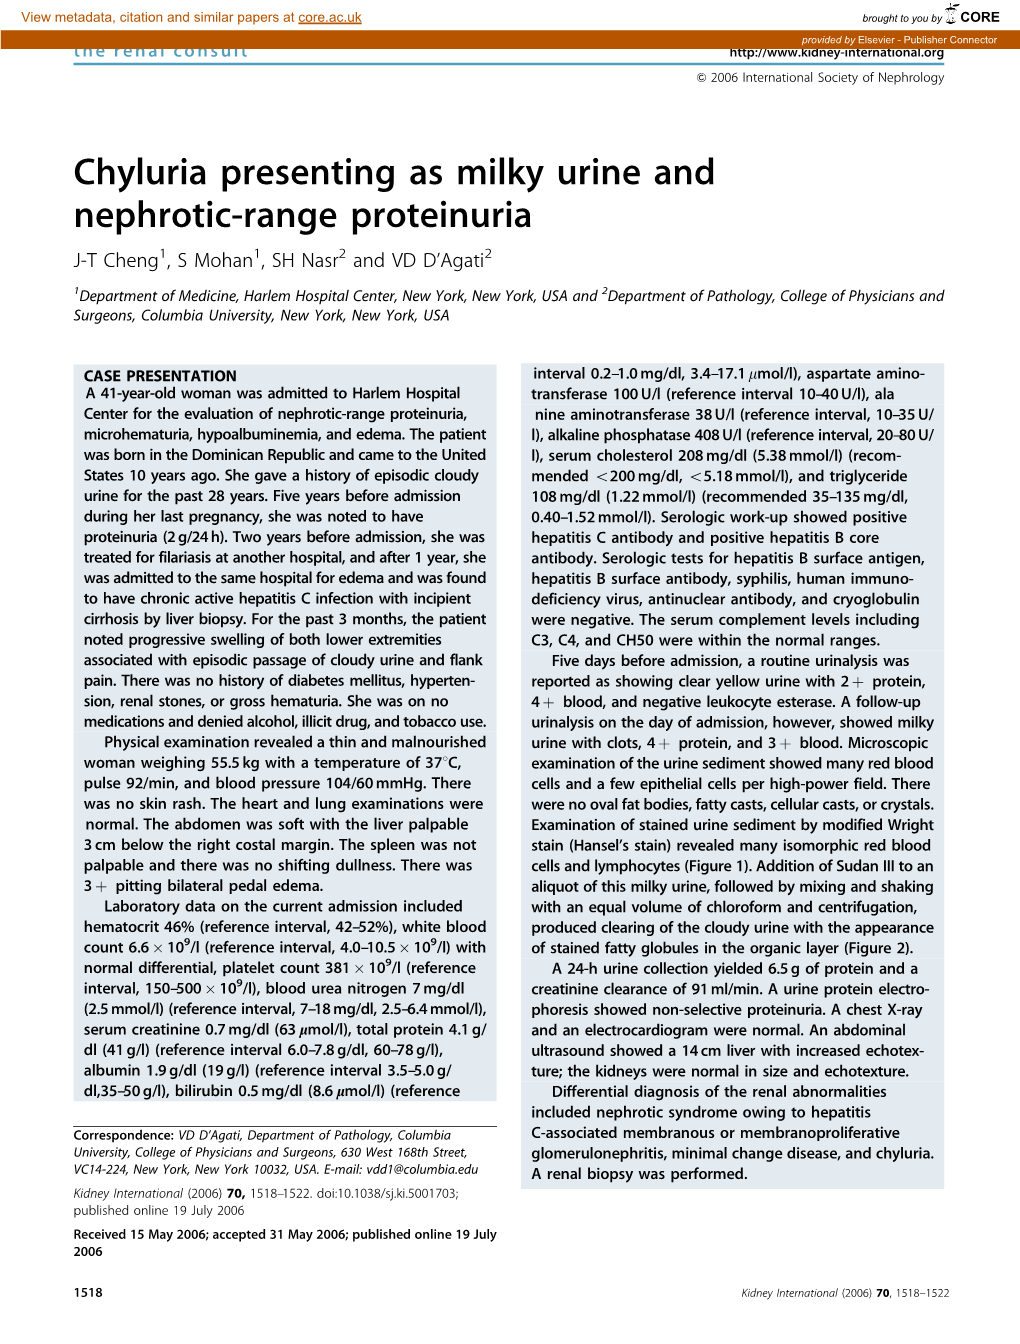 Chyluria Presenting As Milky Urine and Nephrotic-Range Proteinuria J-T Cheng1, S Mohan1, SH Nasr2 and VD D’Agati2